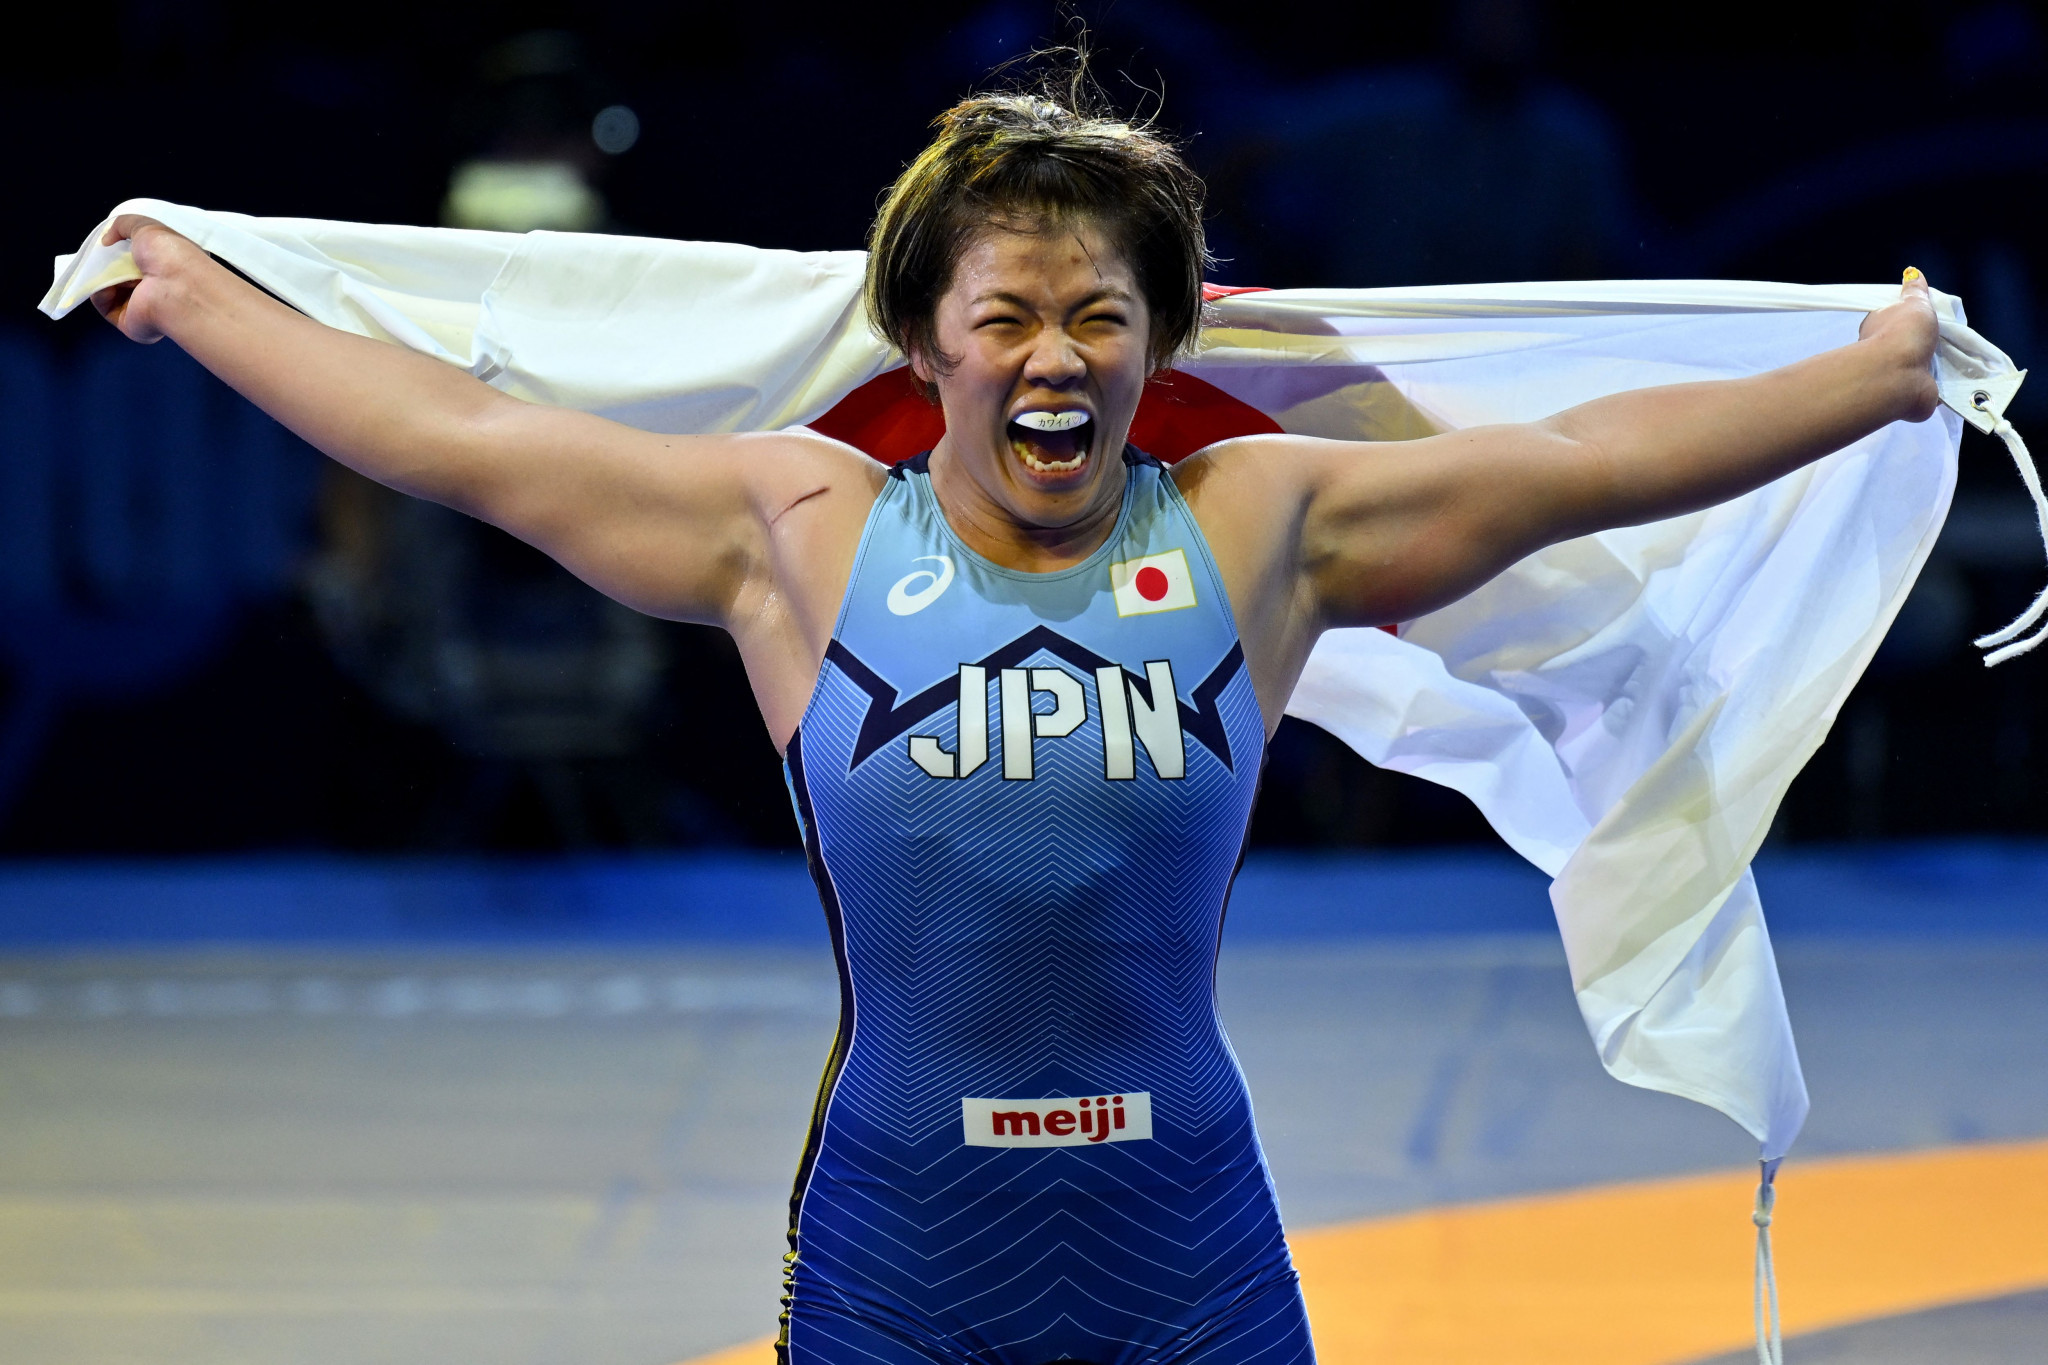 Japan's Yuka Kagami won the women's 76kg gold in Belgrade to seal a place at the Paris 2024 Olympics ©Getty Images